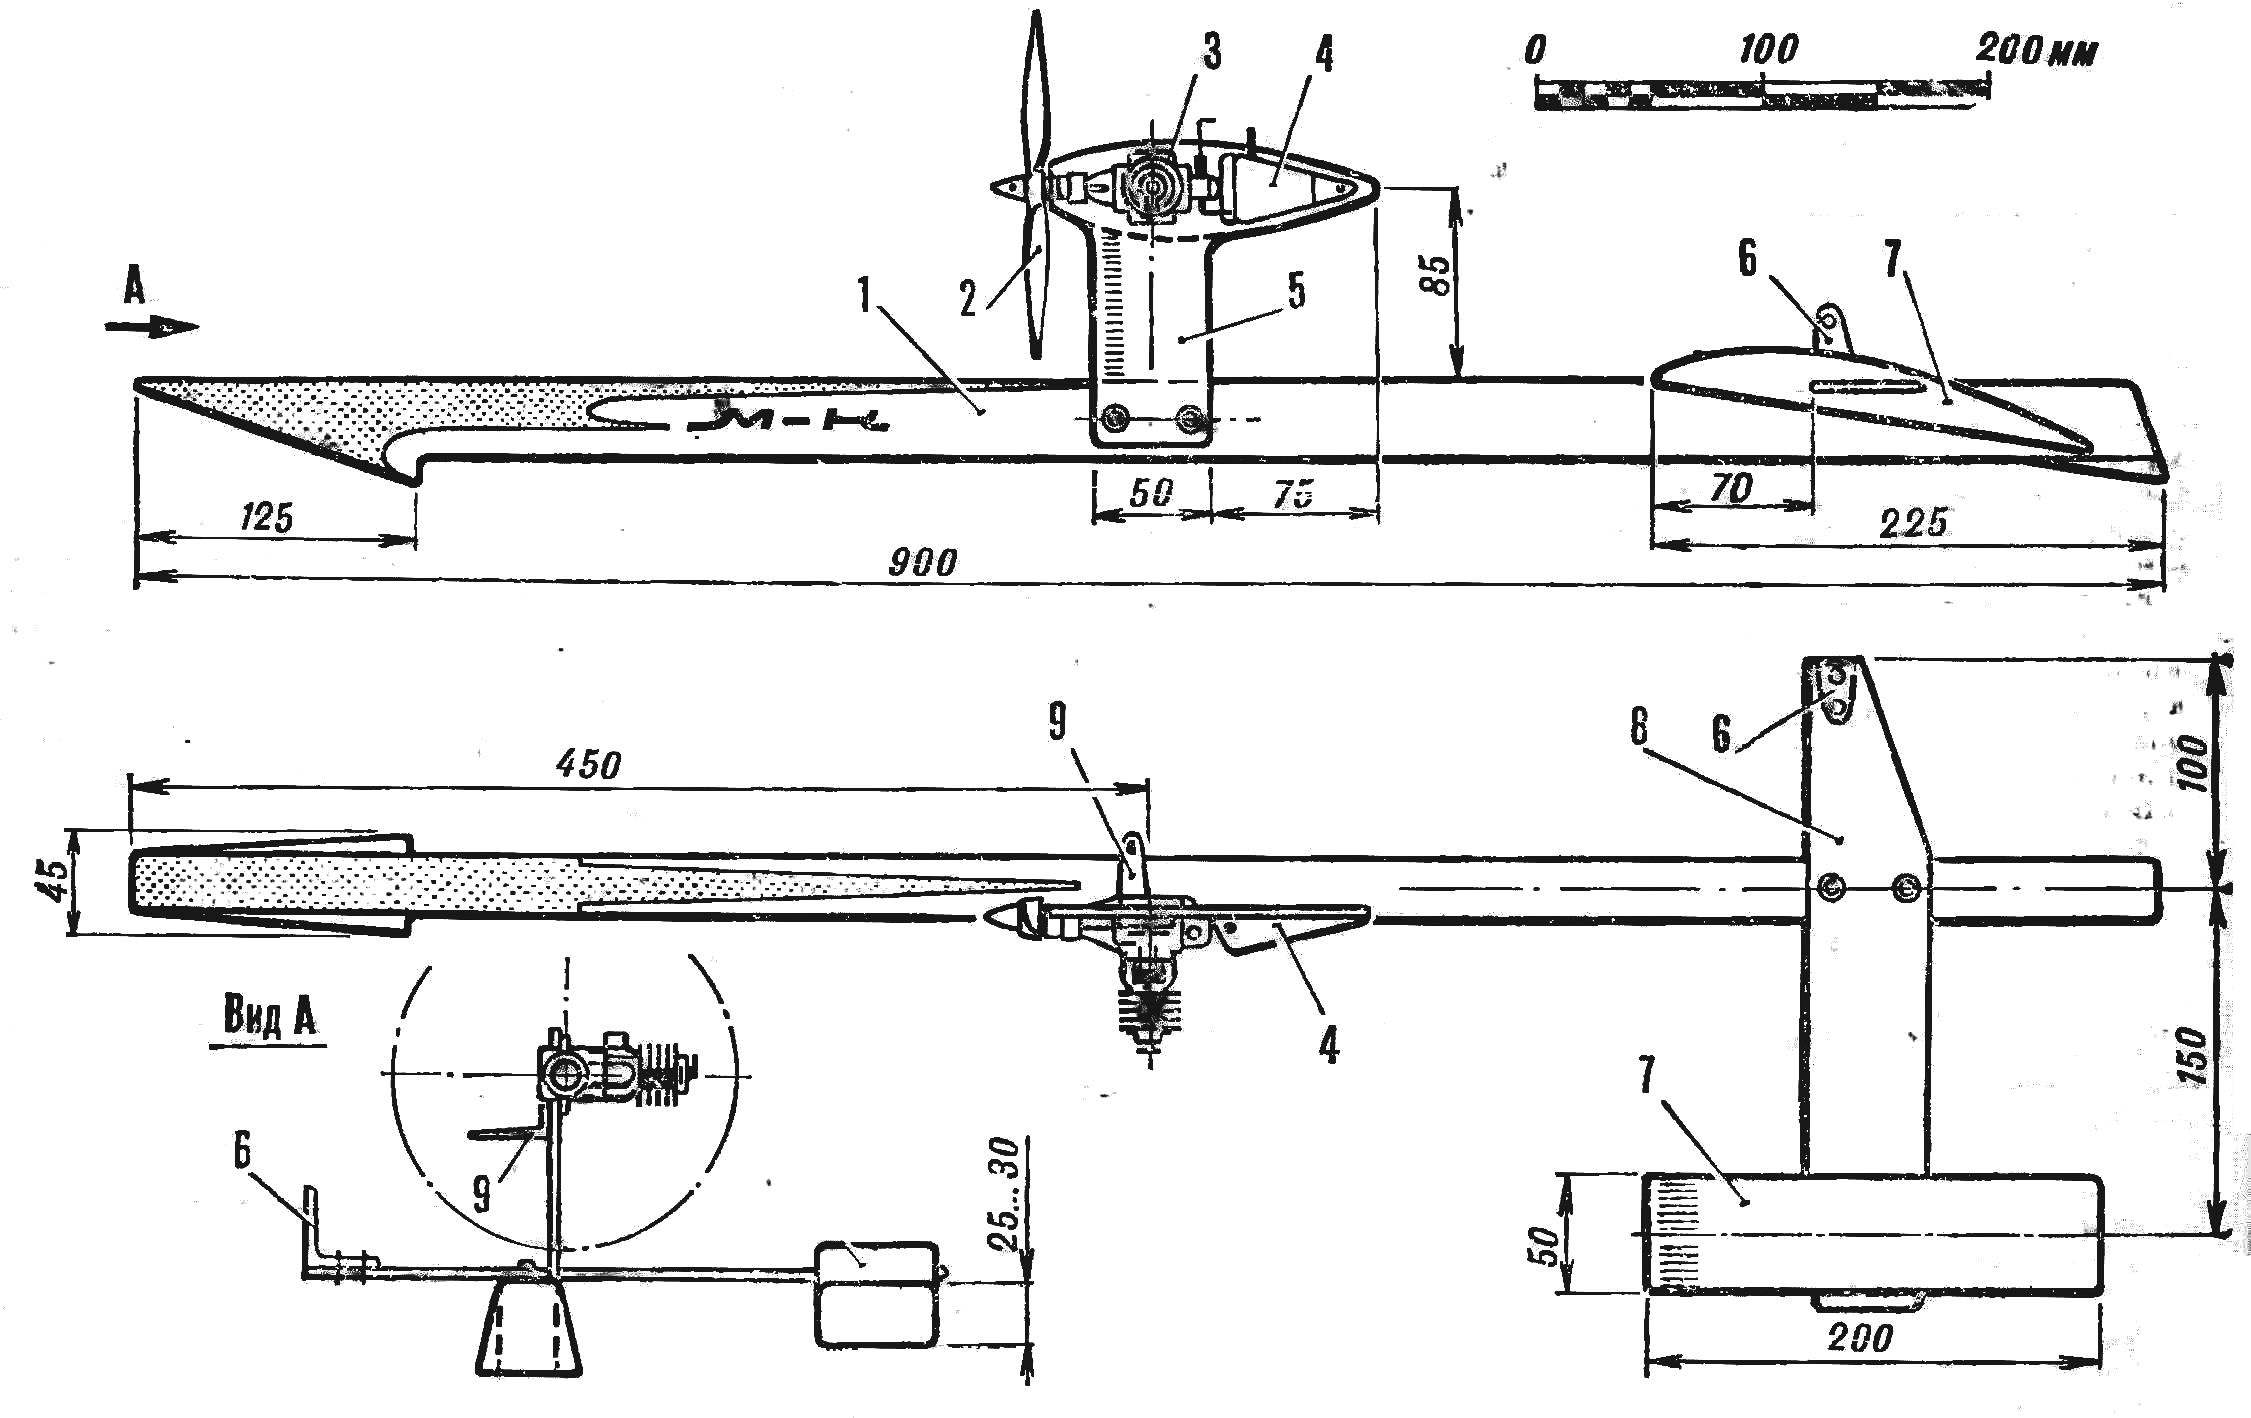 Fig. 1. Cord airboat